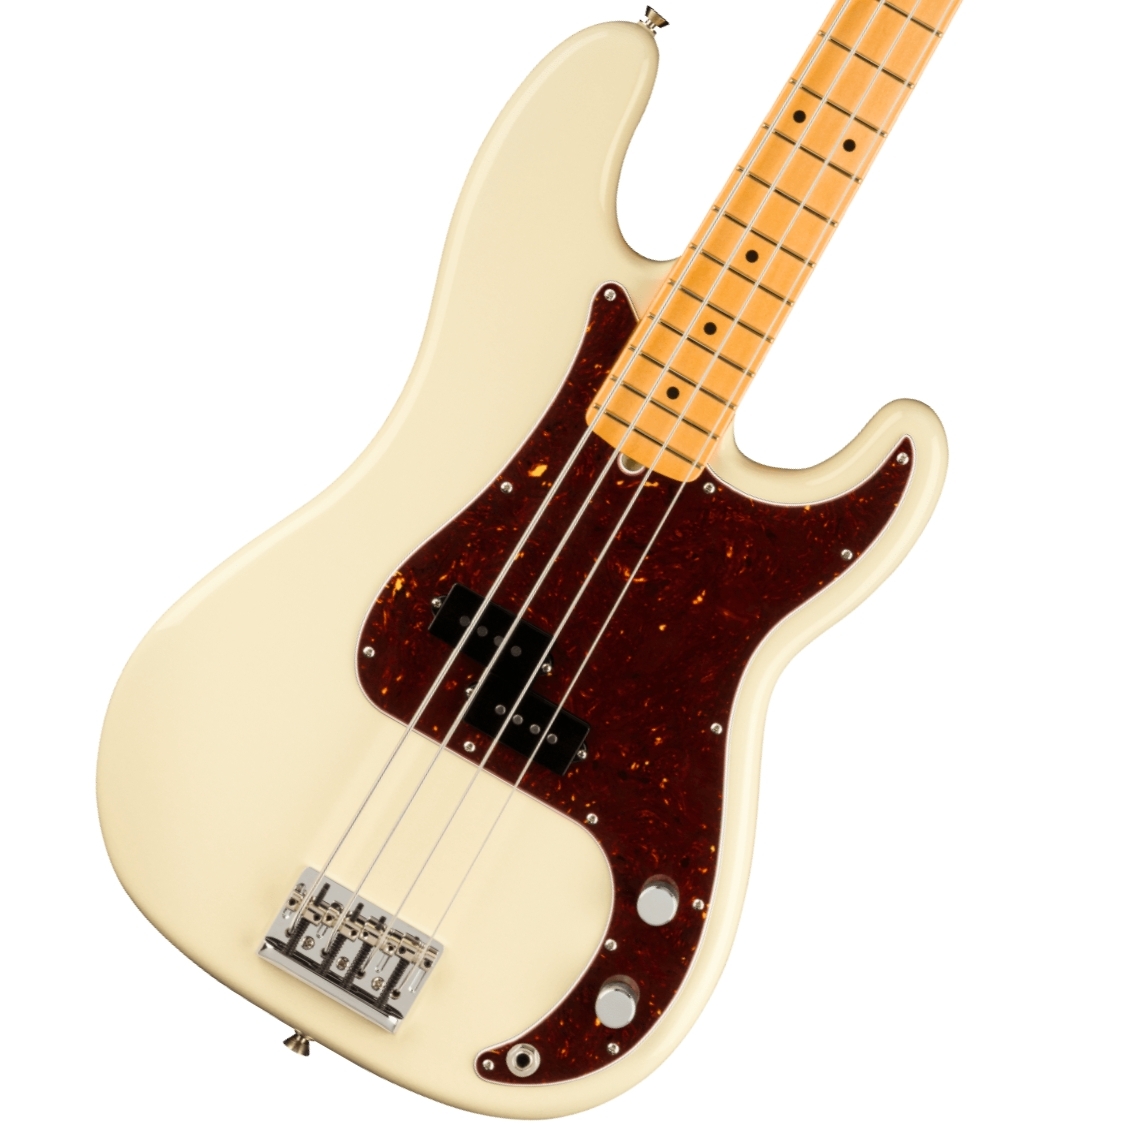 Fender　Maple　Bass　White　Fingerboard　Olympic　American　イシバシ楽器　Professional　II　Precision　フェンダー